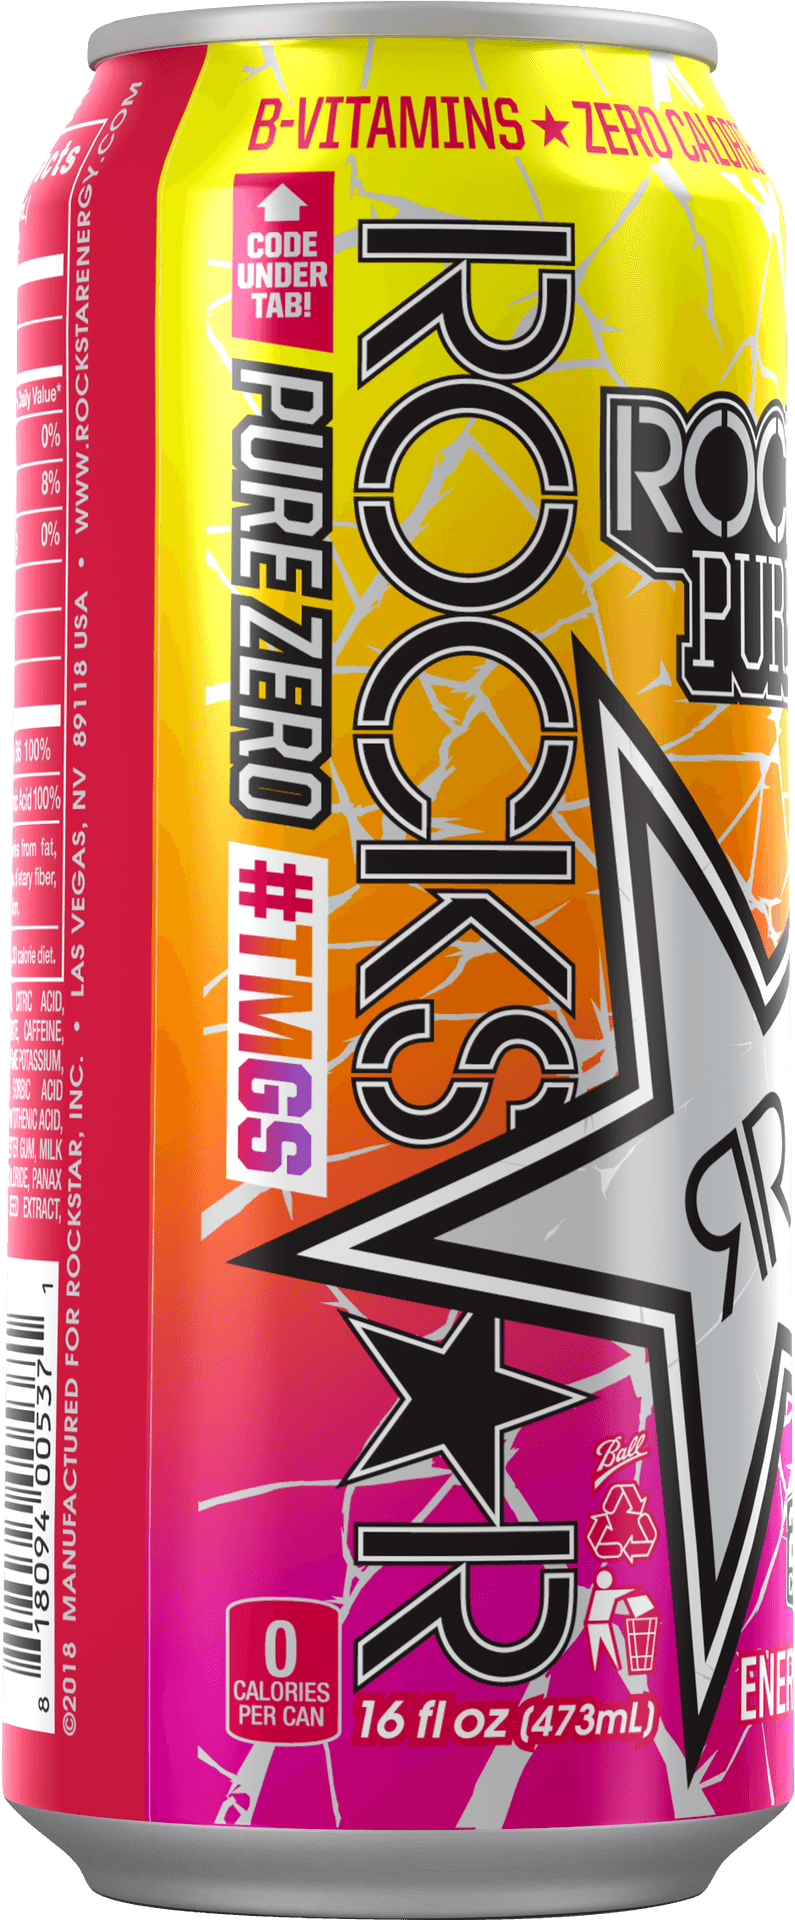 Rockstar Pure Zero Energy Drink Can PNG